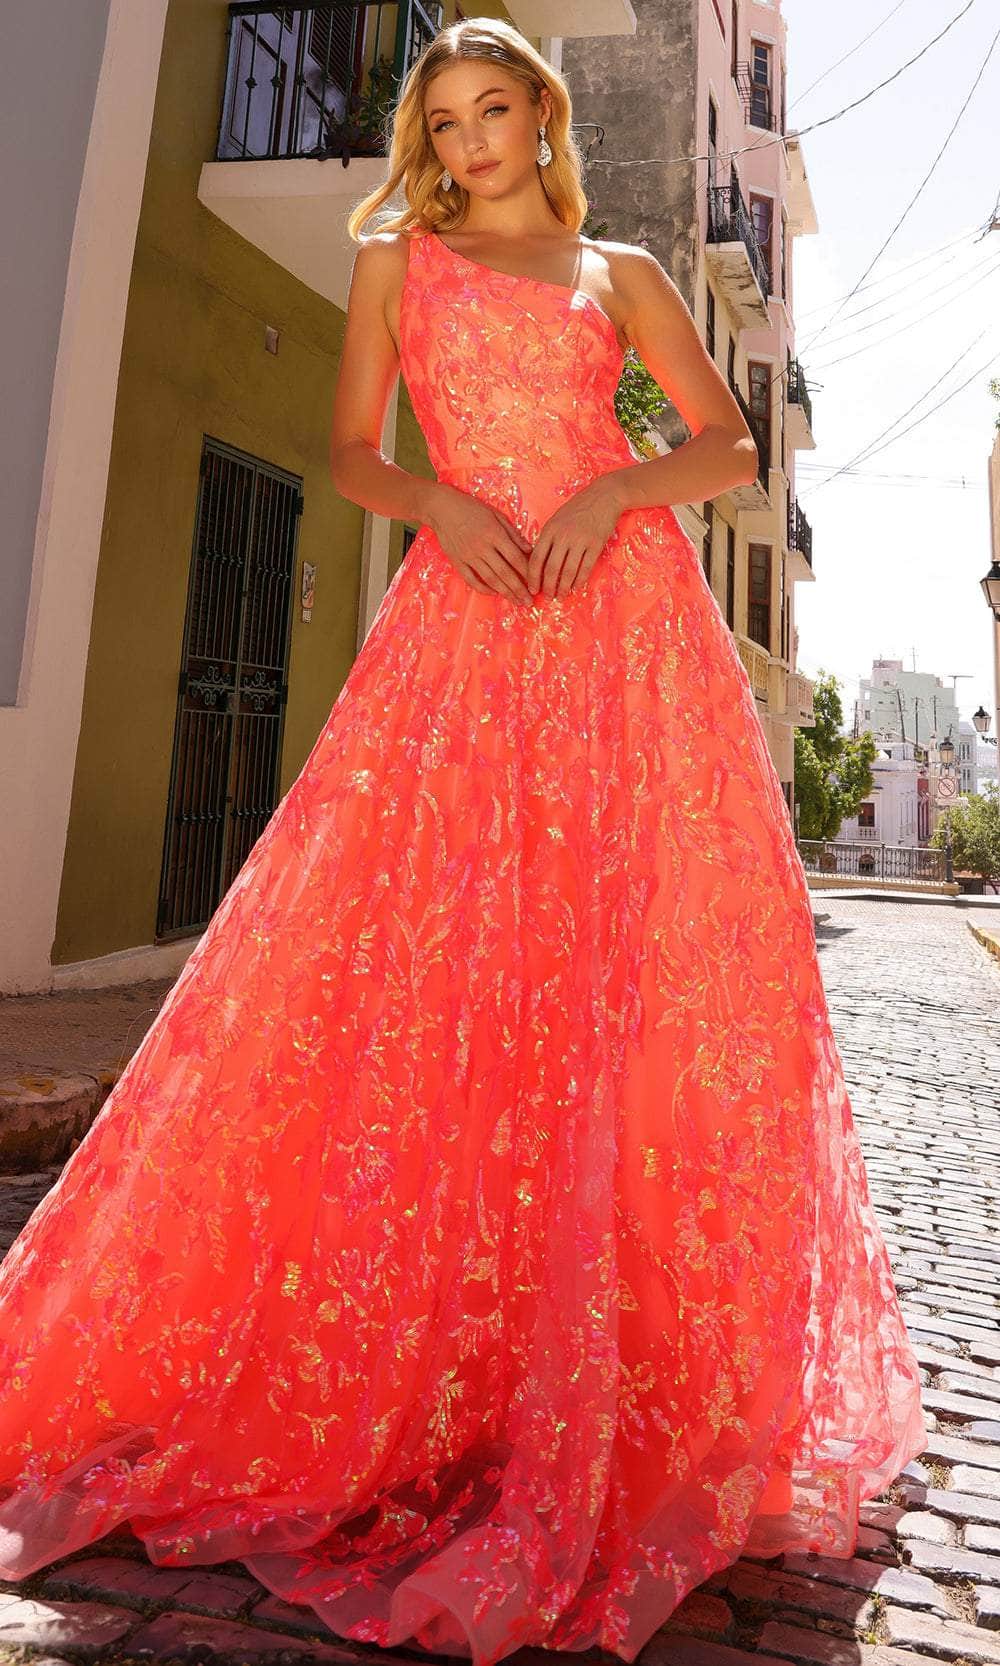 Nox Anabel R1305 - Sequin Embellished A-Line Gown Prom Dresses 0 / Neon Peach